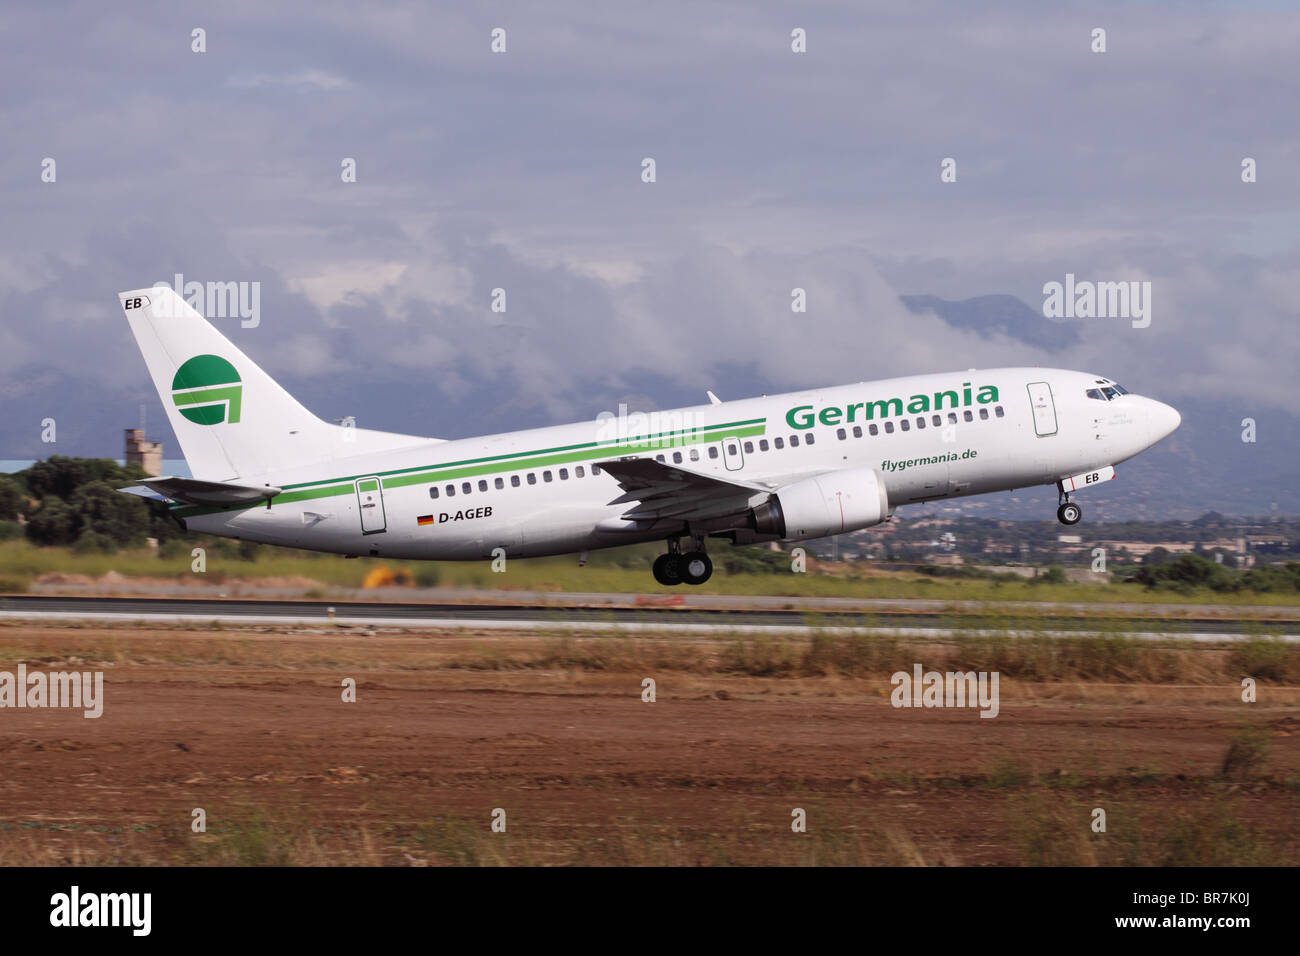 Germania Boeing 737 jet aircraft airline airliner taking off at Palma airport Mallorca Spain Stock Photo